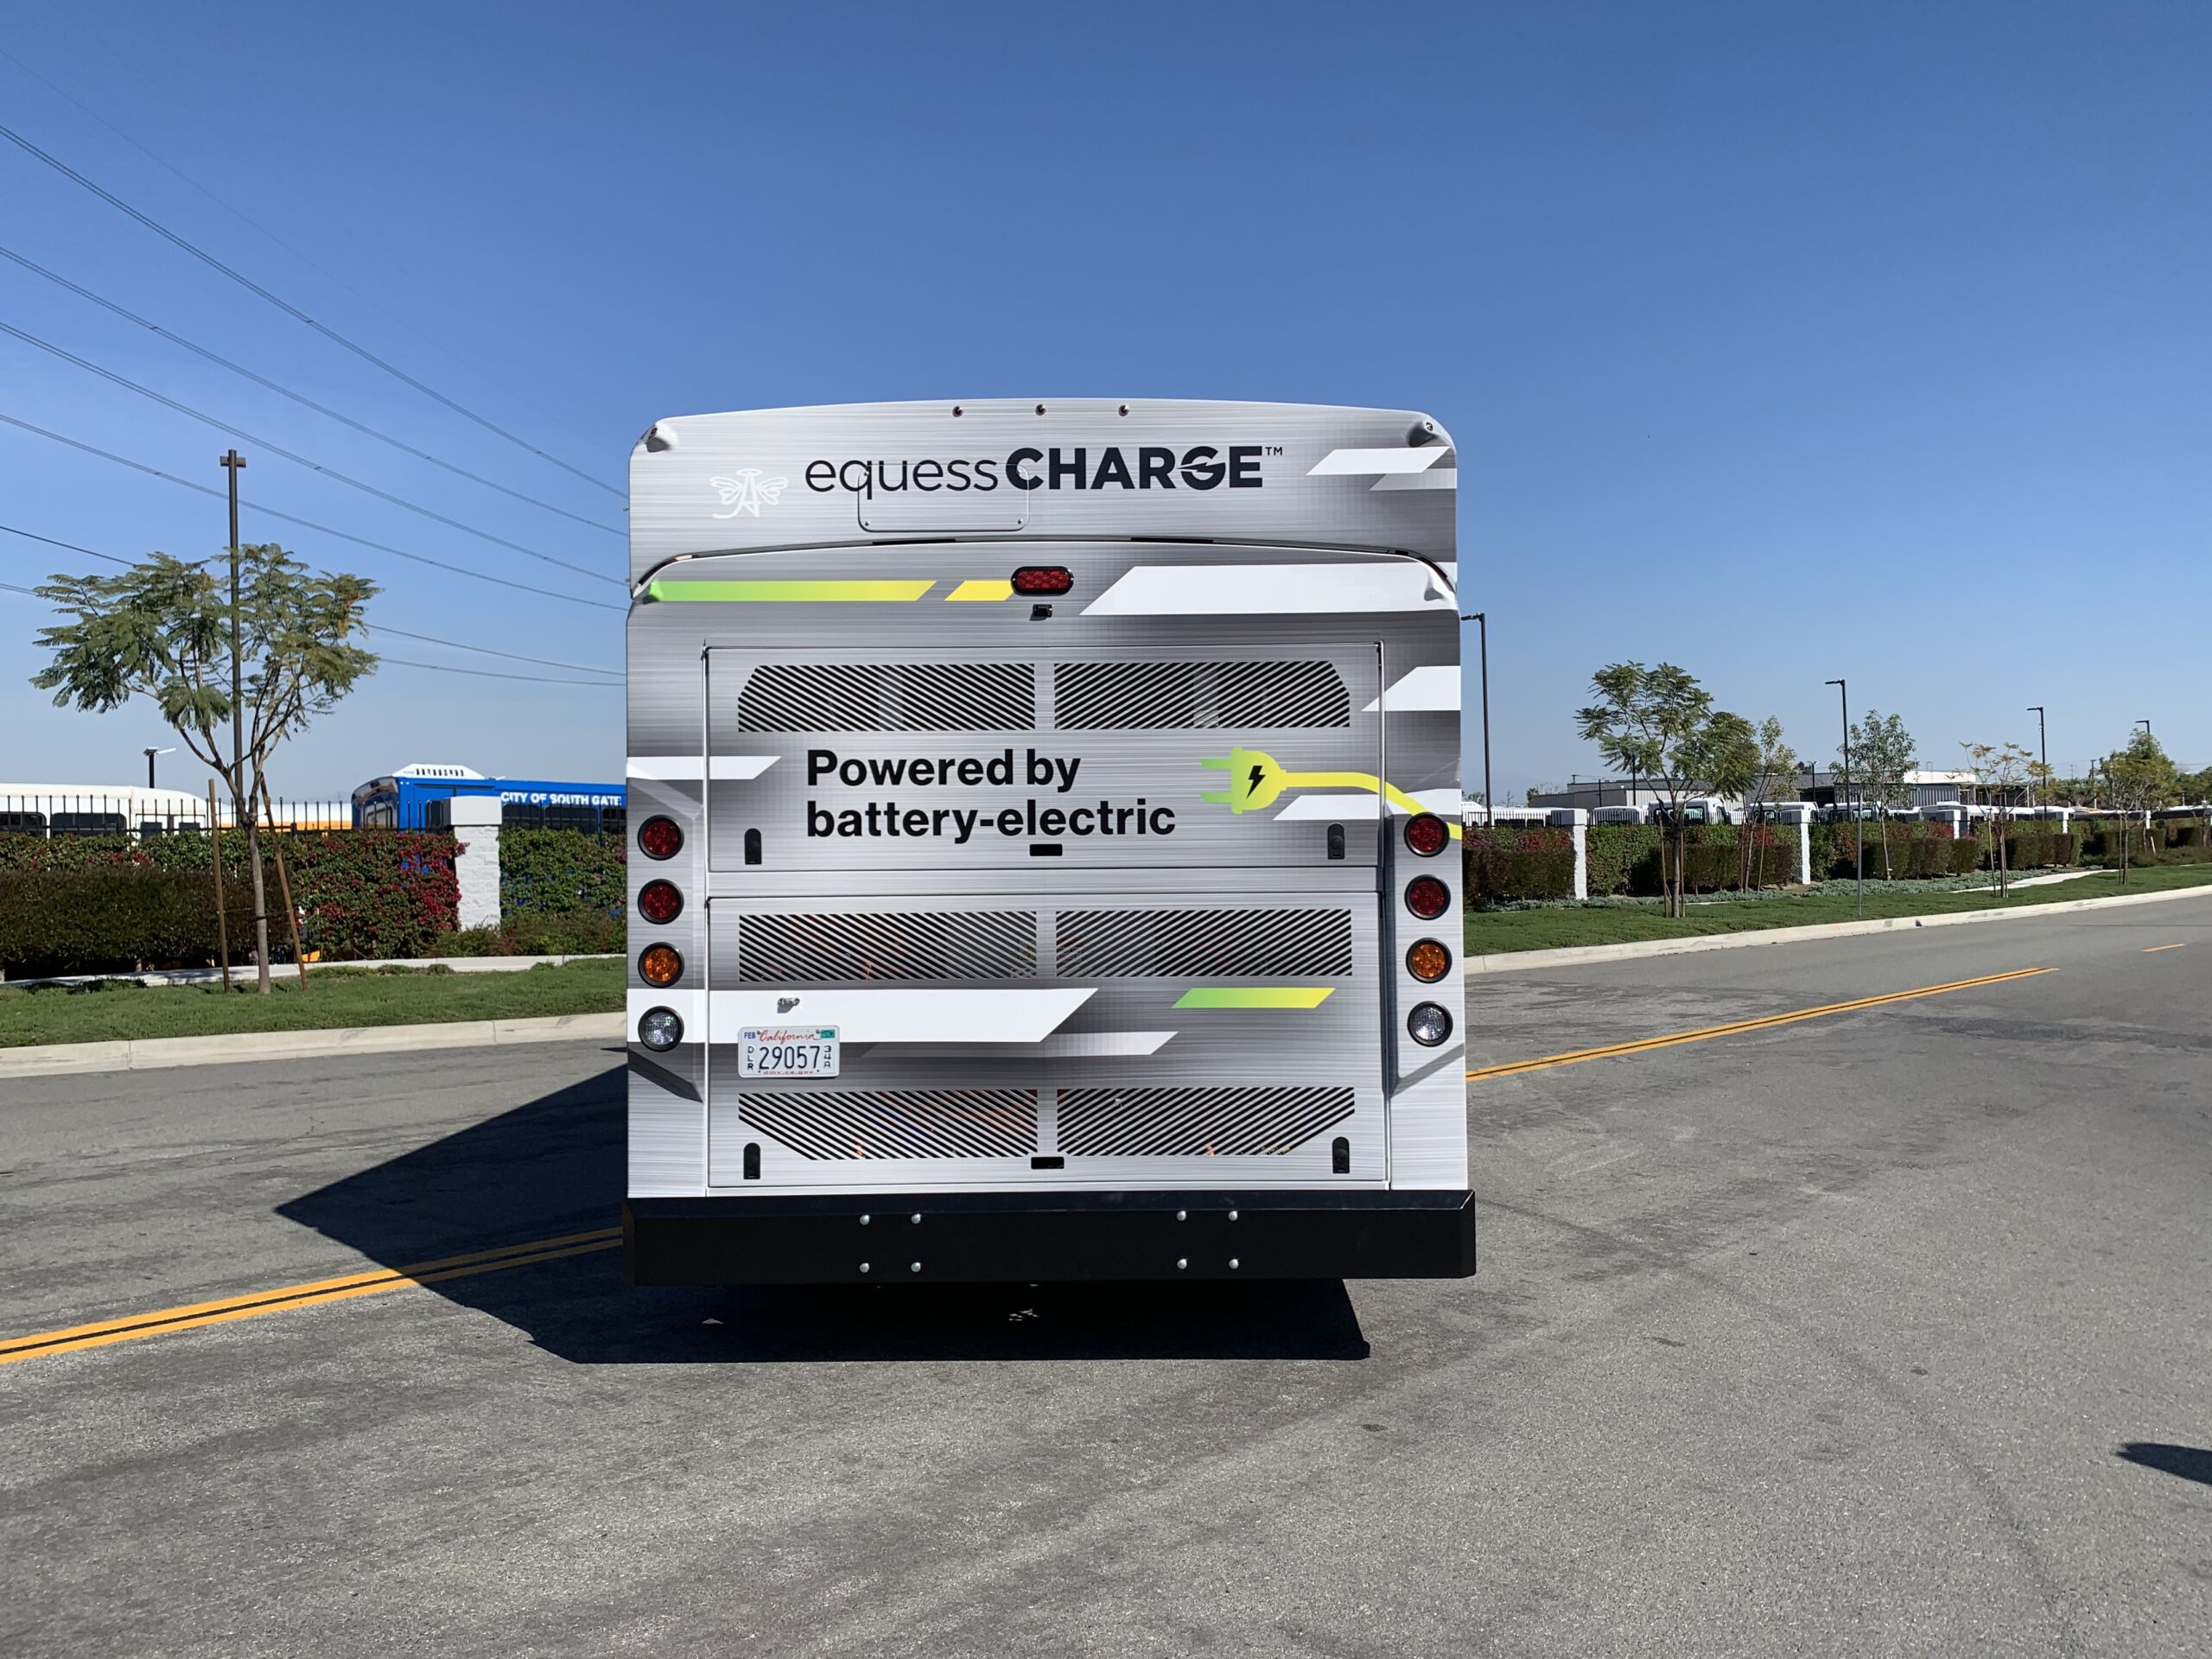 A 2021 ARBOC Equess CHARGE bus is parked on the side of the road.